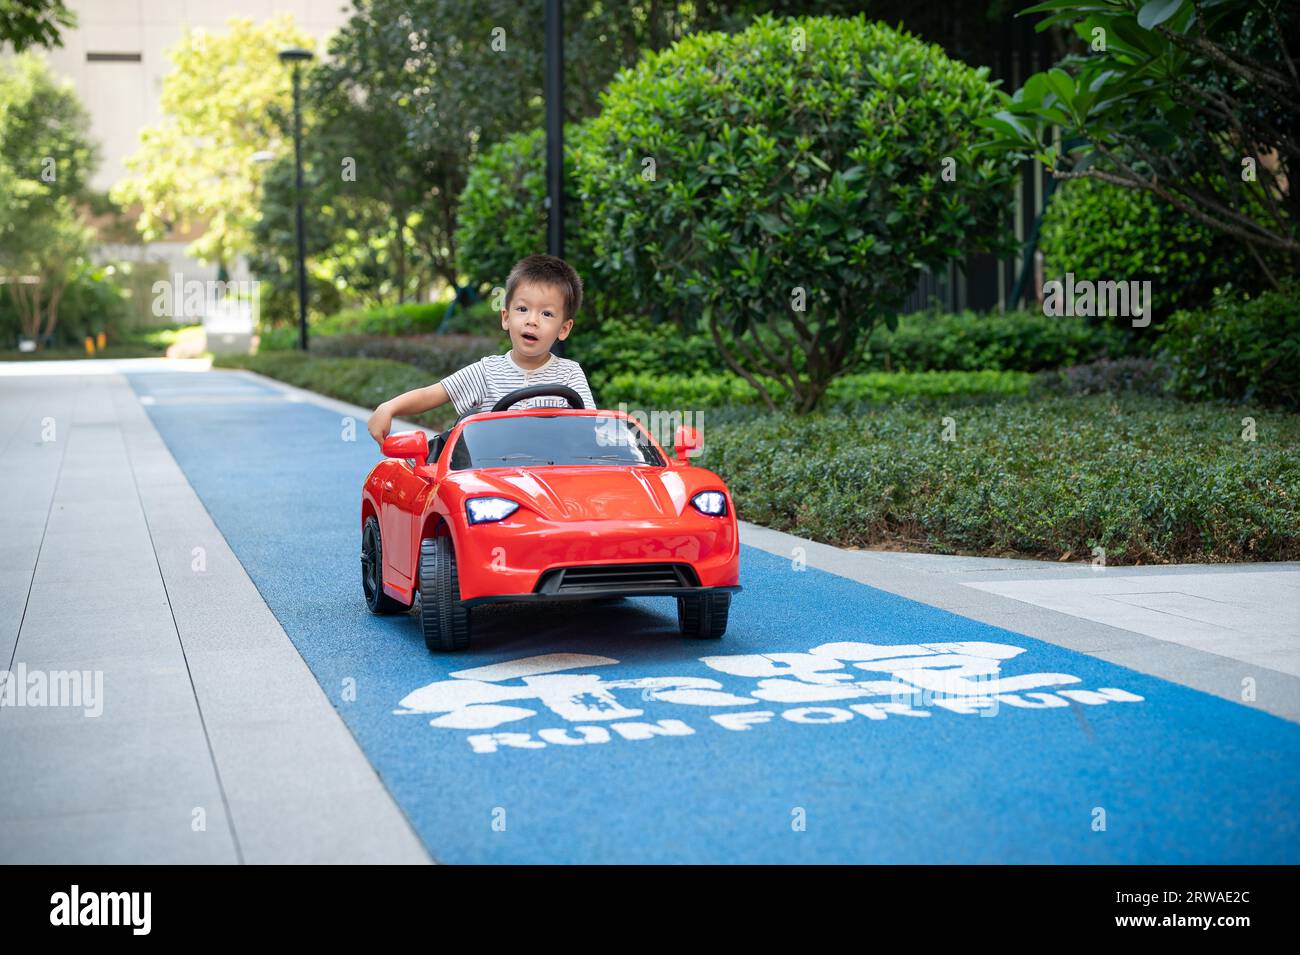 Cute multiracial toddler boy looks around while riding a red remote controlled car on a paved track Stock Photo